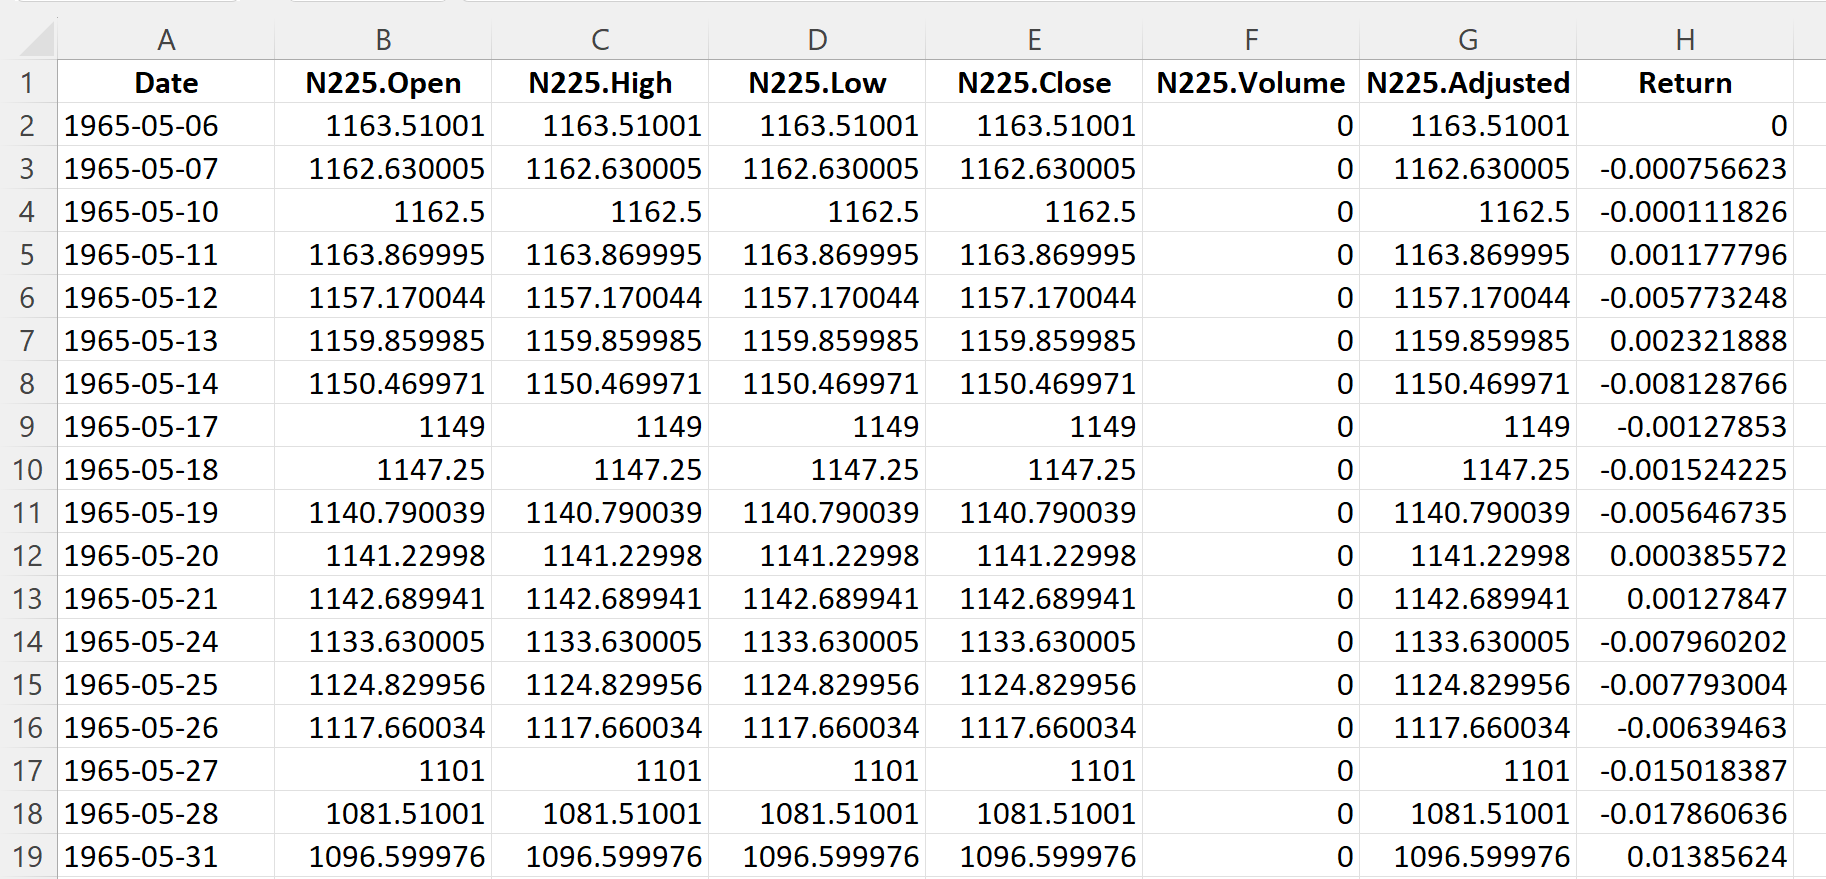 Top of the file for the Nikkei 225 index data